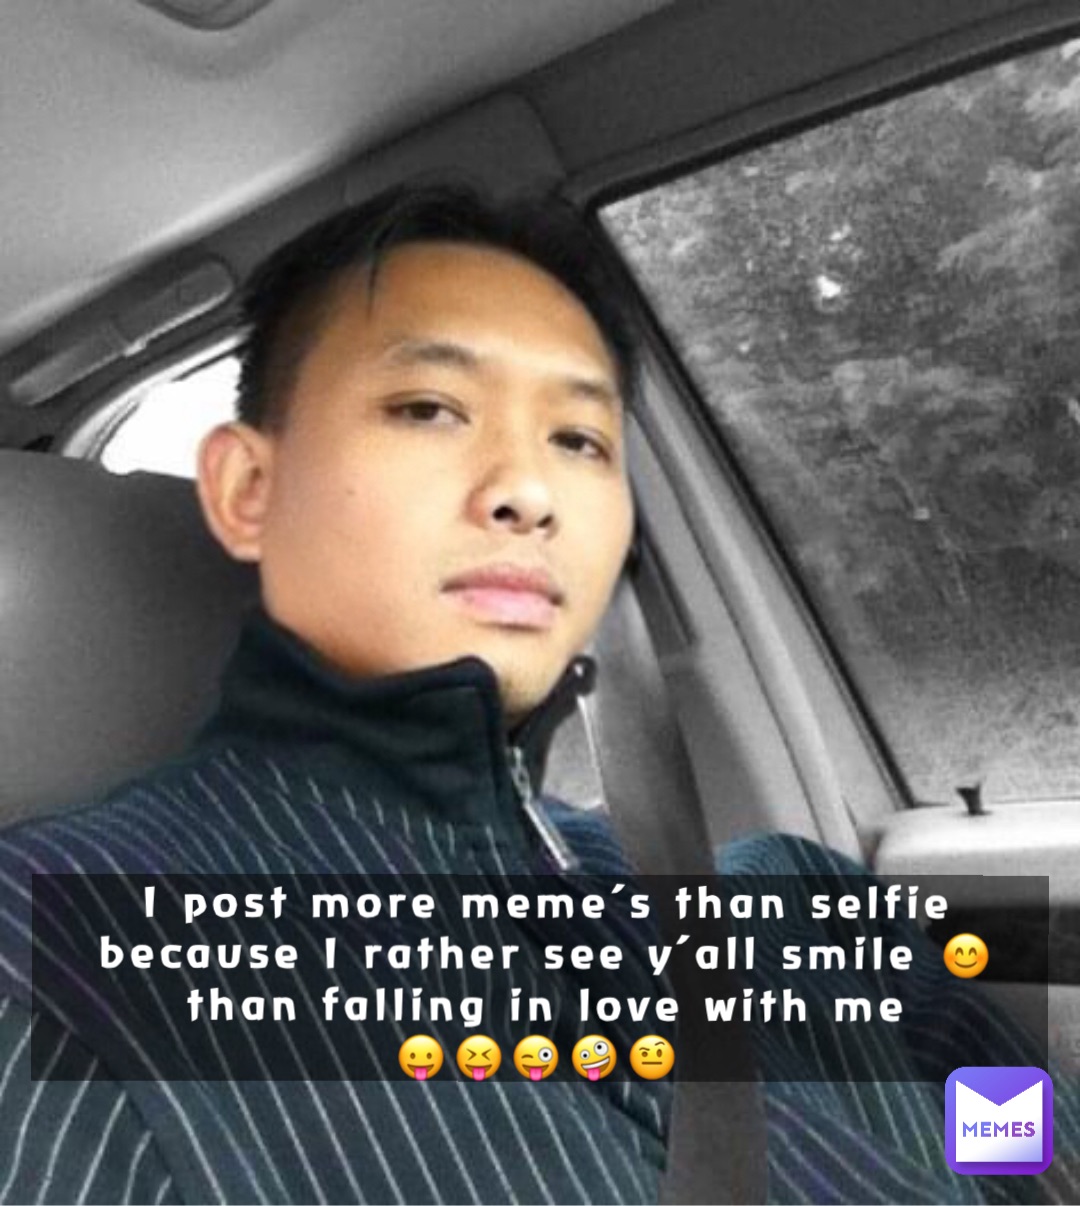 I post more meme’s than selfie because I rather see y’all smile 😊 than falling in love with me 
😛😝😜🤪🤨